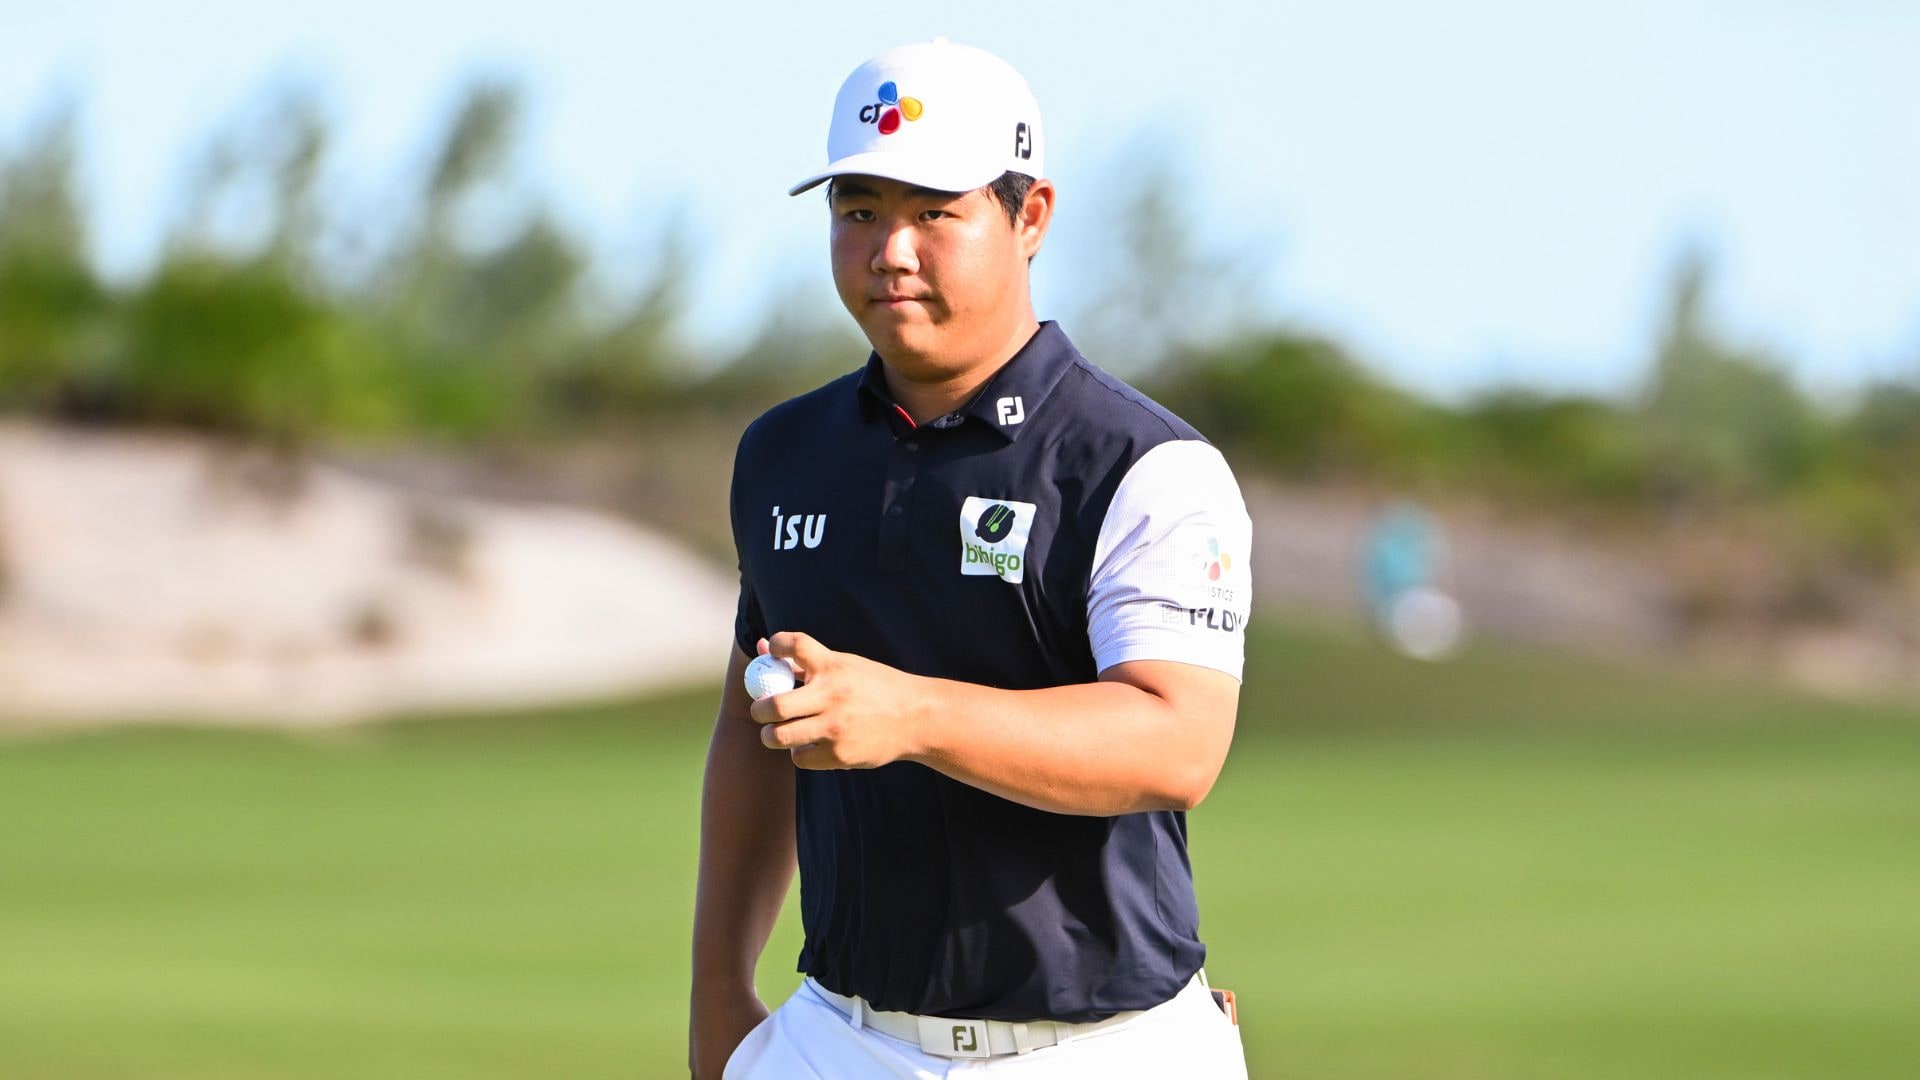 In a year of ‘pinch myself’ moments, Tom Kim dazzles again Thursday at Hero World Challenge